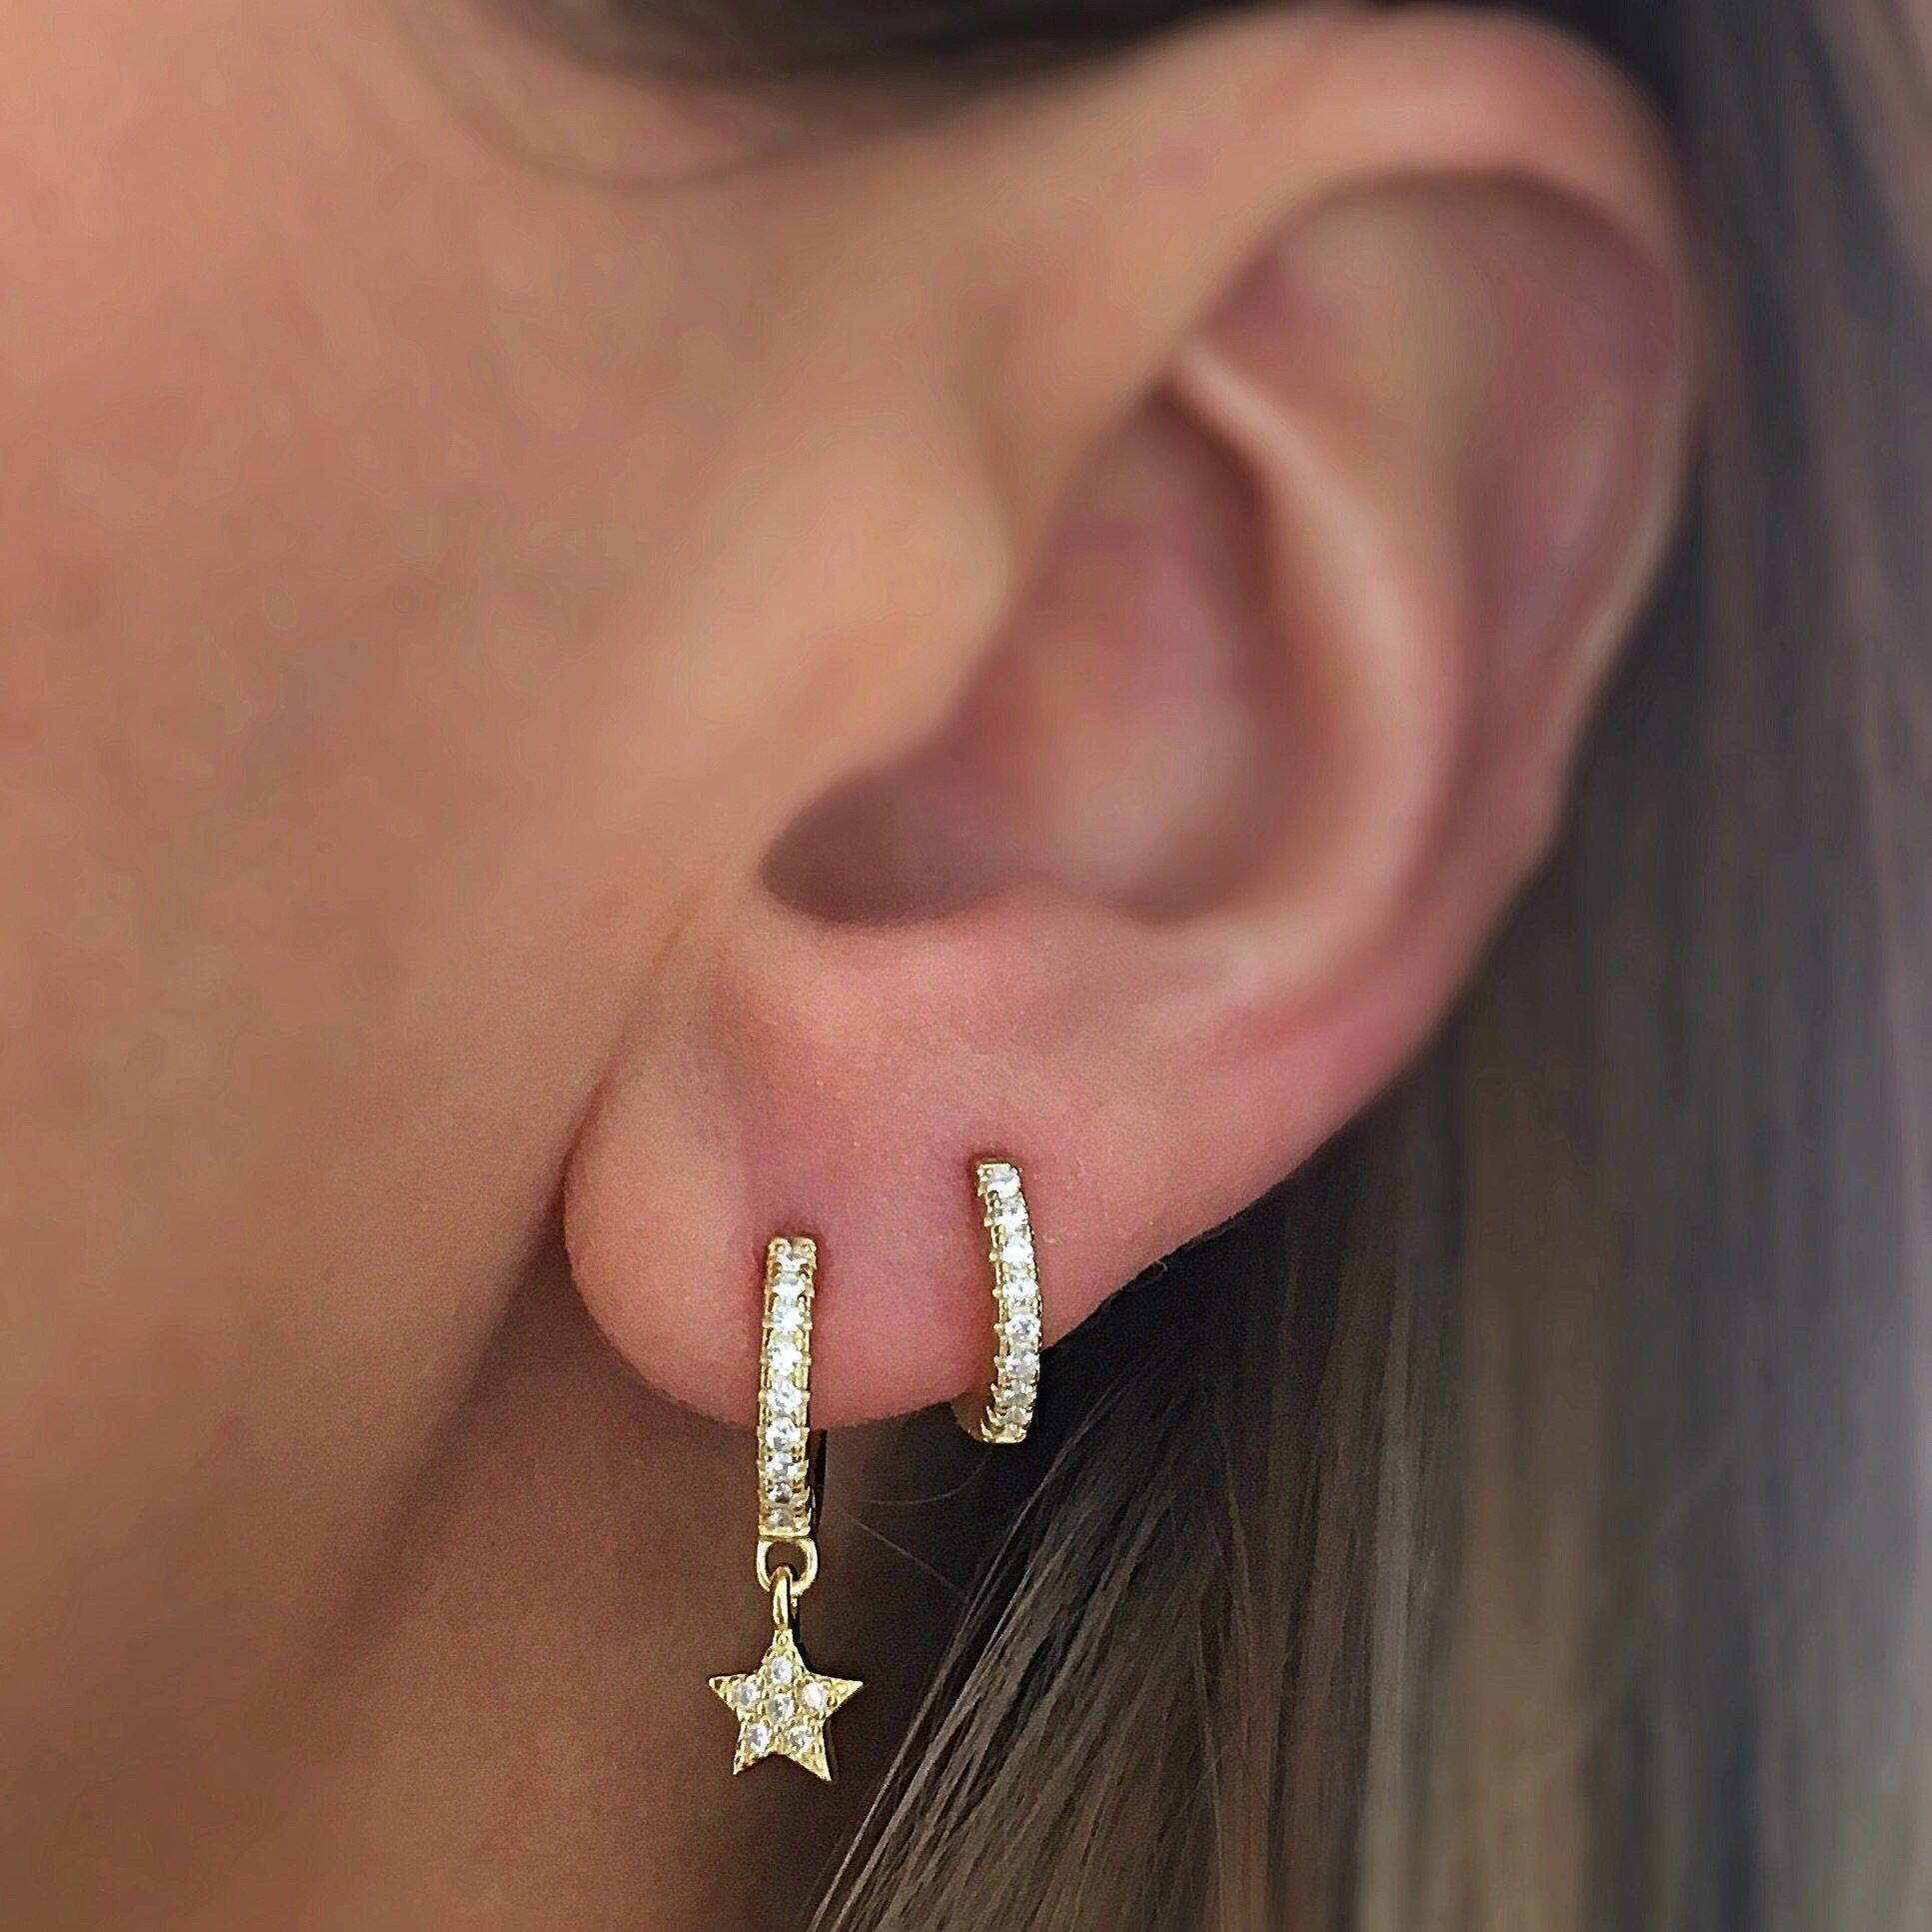 Keeping You Updated on Latest Earring Style Trends in the UK - A Must-Read! - Helix & Conch